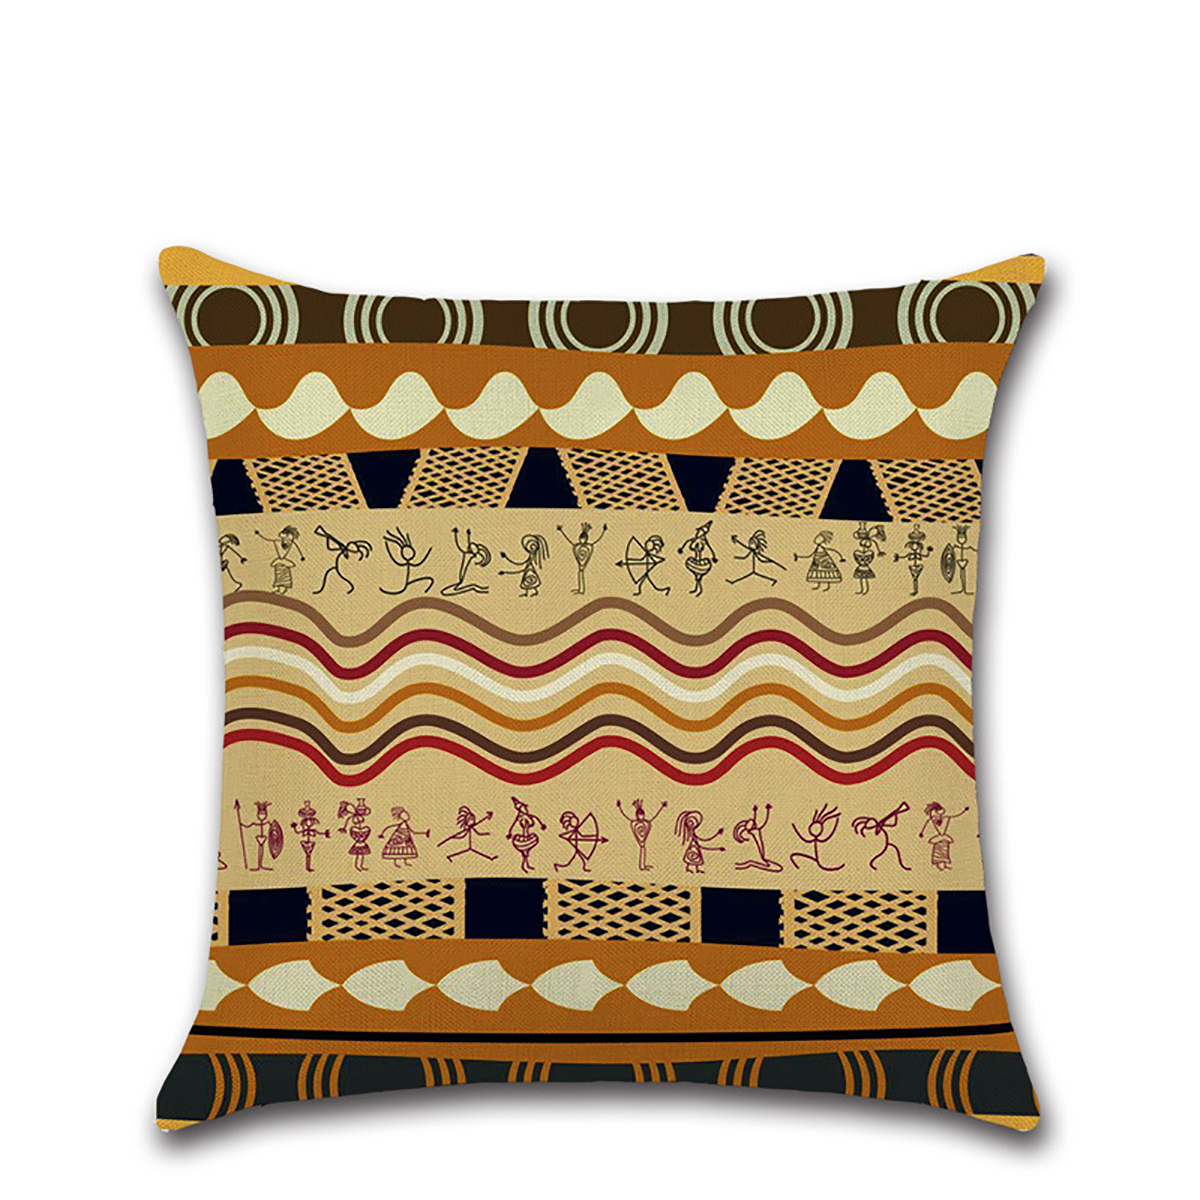 45x45CM-African-National-Style-Geometric-Printing-Cushion-Cover-Linen-Pillow-Case-Home-Decor-Pillow--1915524-4